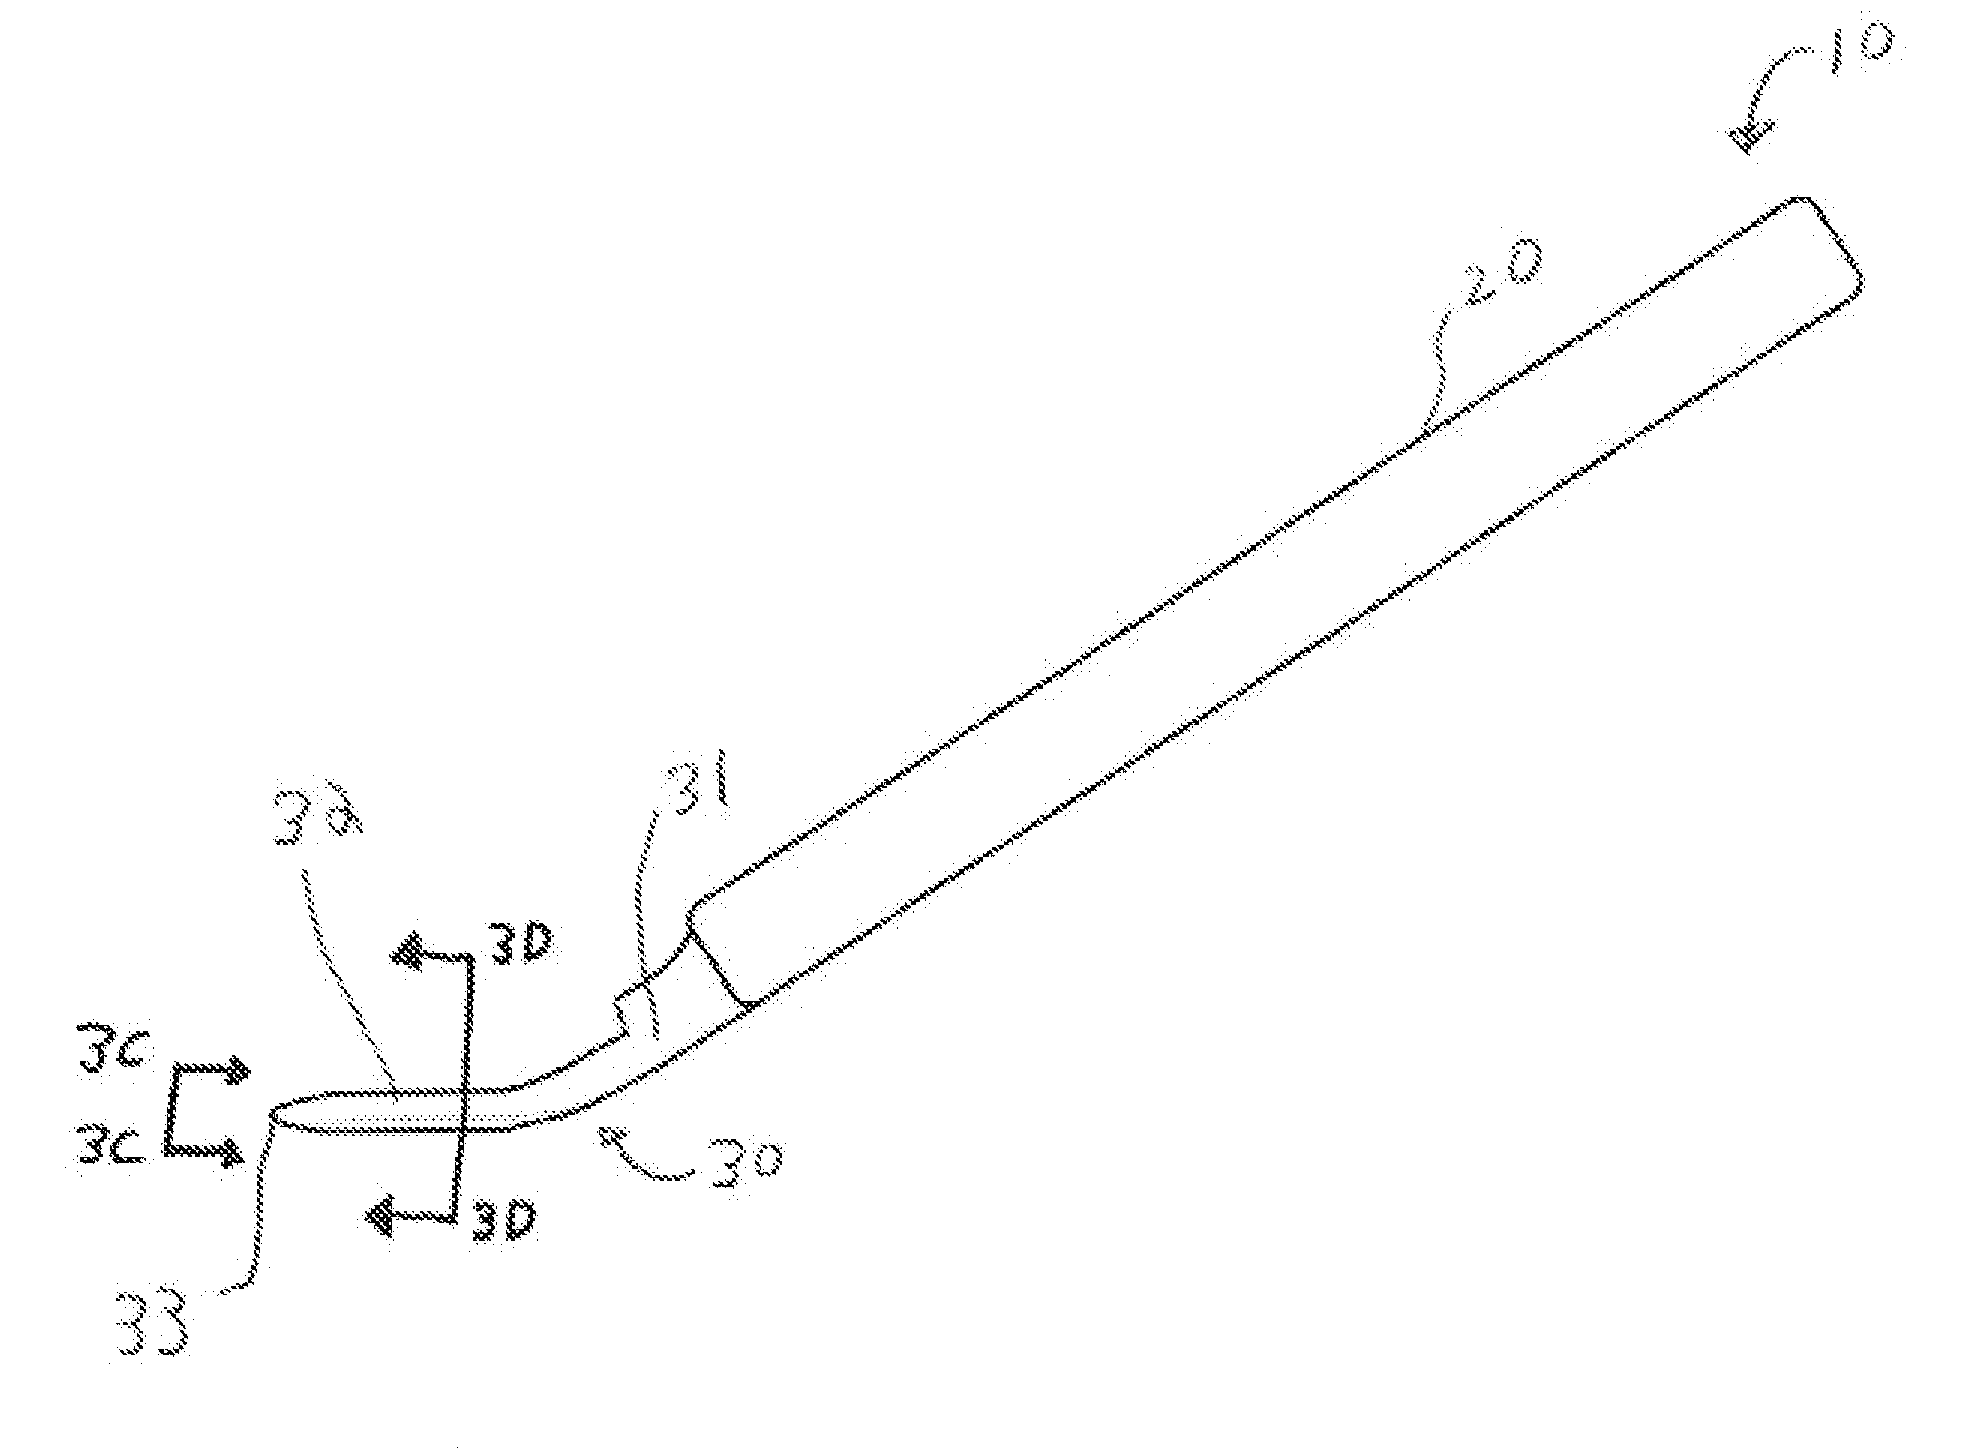 Surgical tool with integral blade and self-centering tip